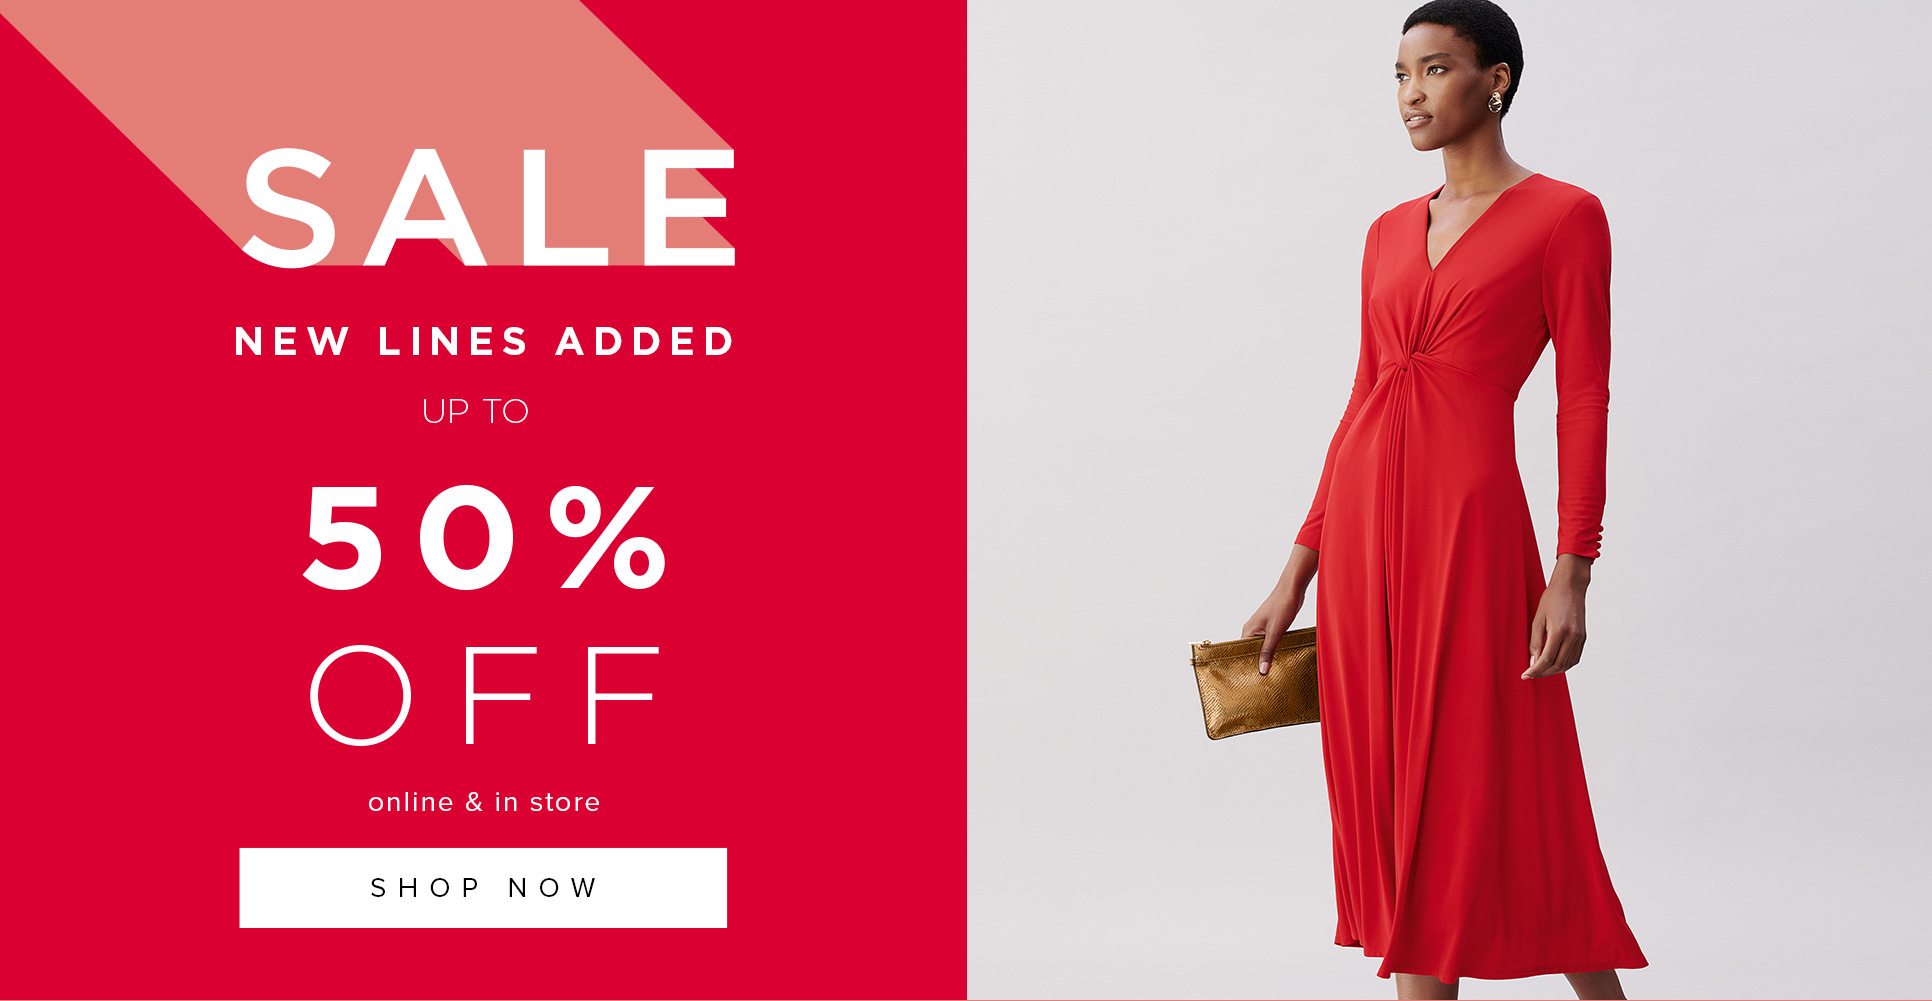 Hobbs End Of Season Sale Up To 50% Off. New Lines Added.